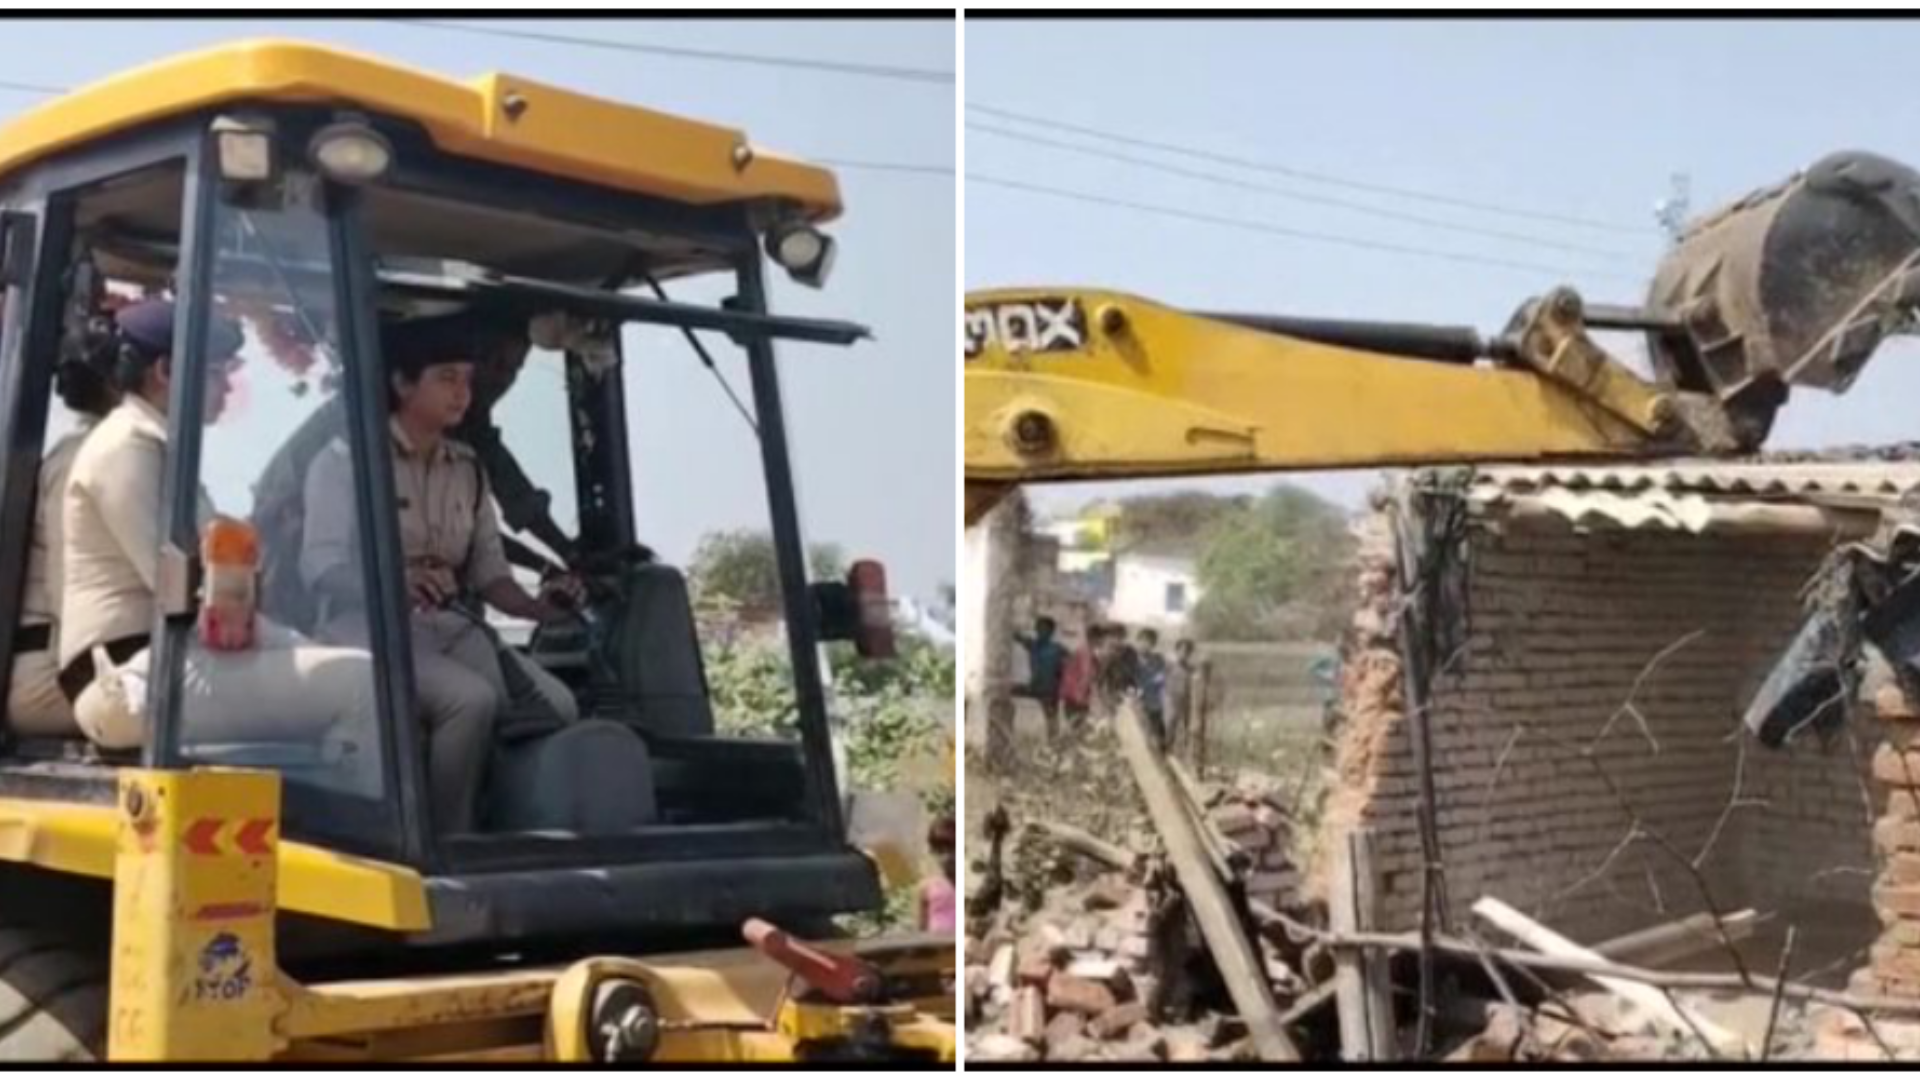 Illegal Portion of House Demolished After Arrest of Man Accused of Rape and Assault in Madhya Pradesh